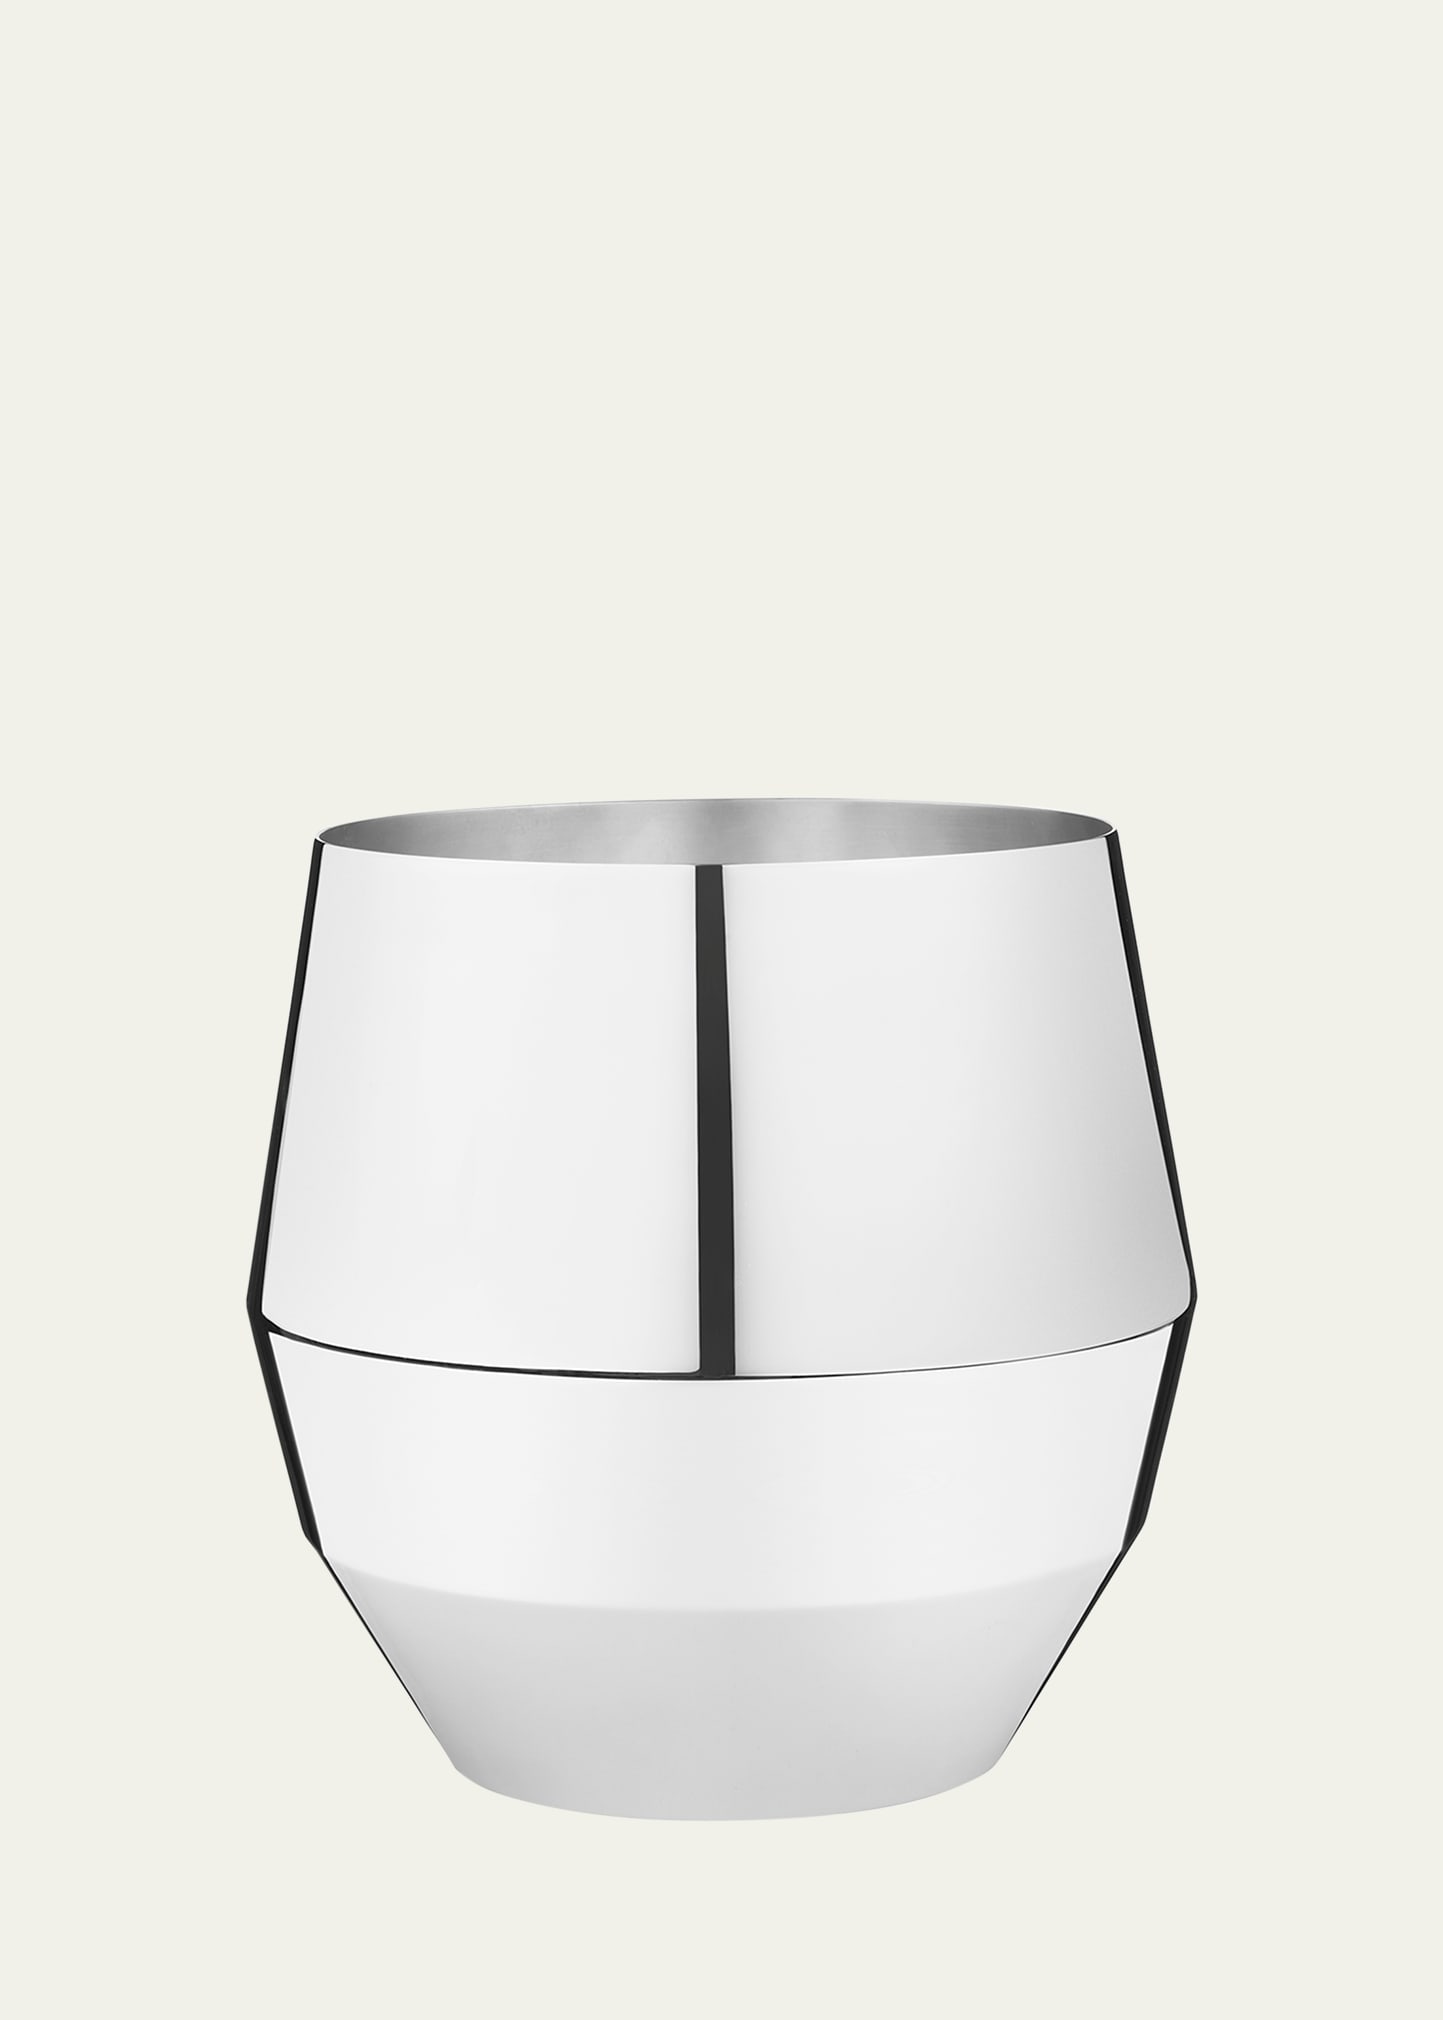 Hermès Silver-Plated Champagne Bucket